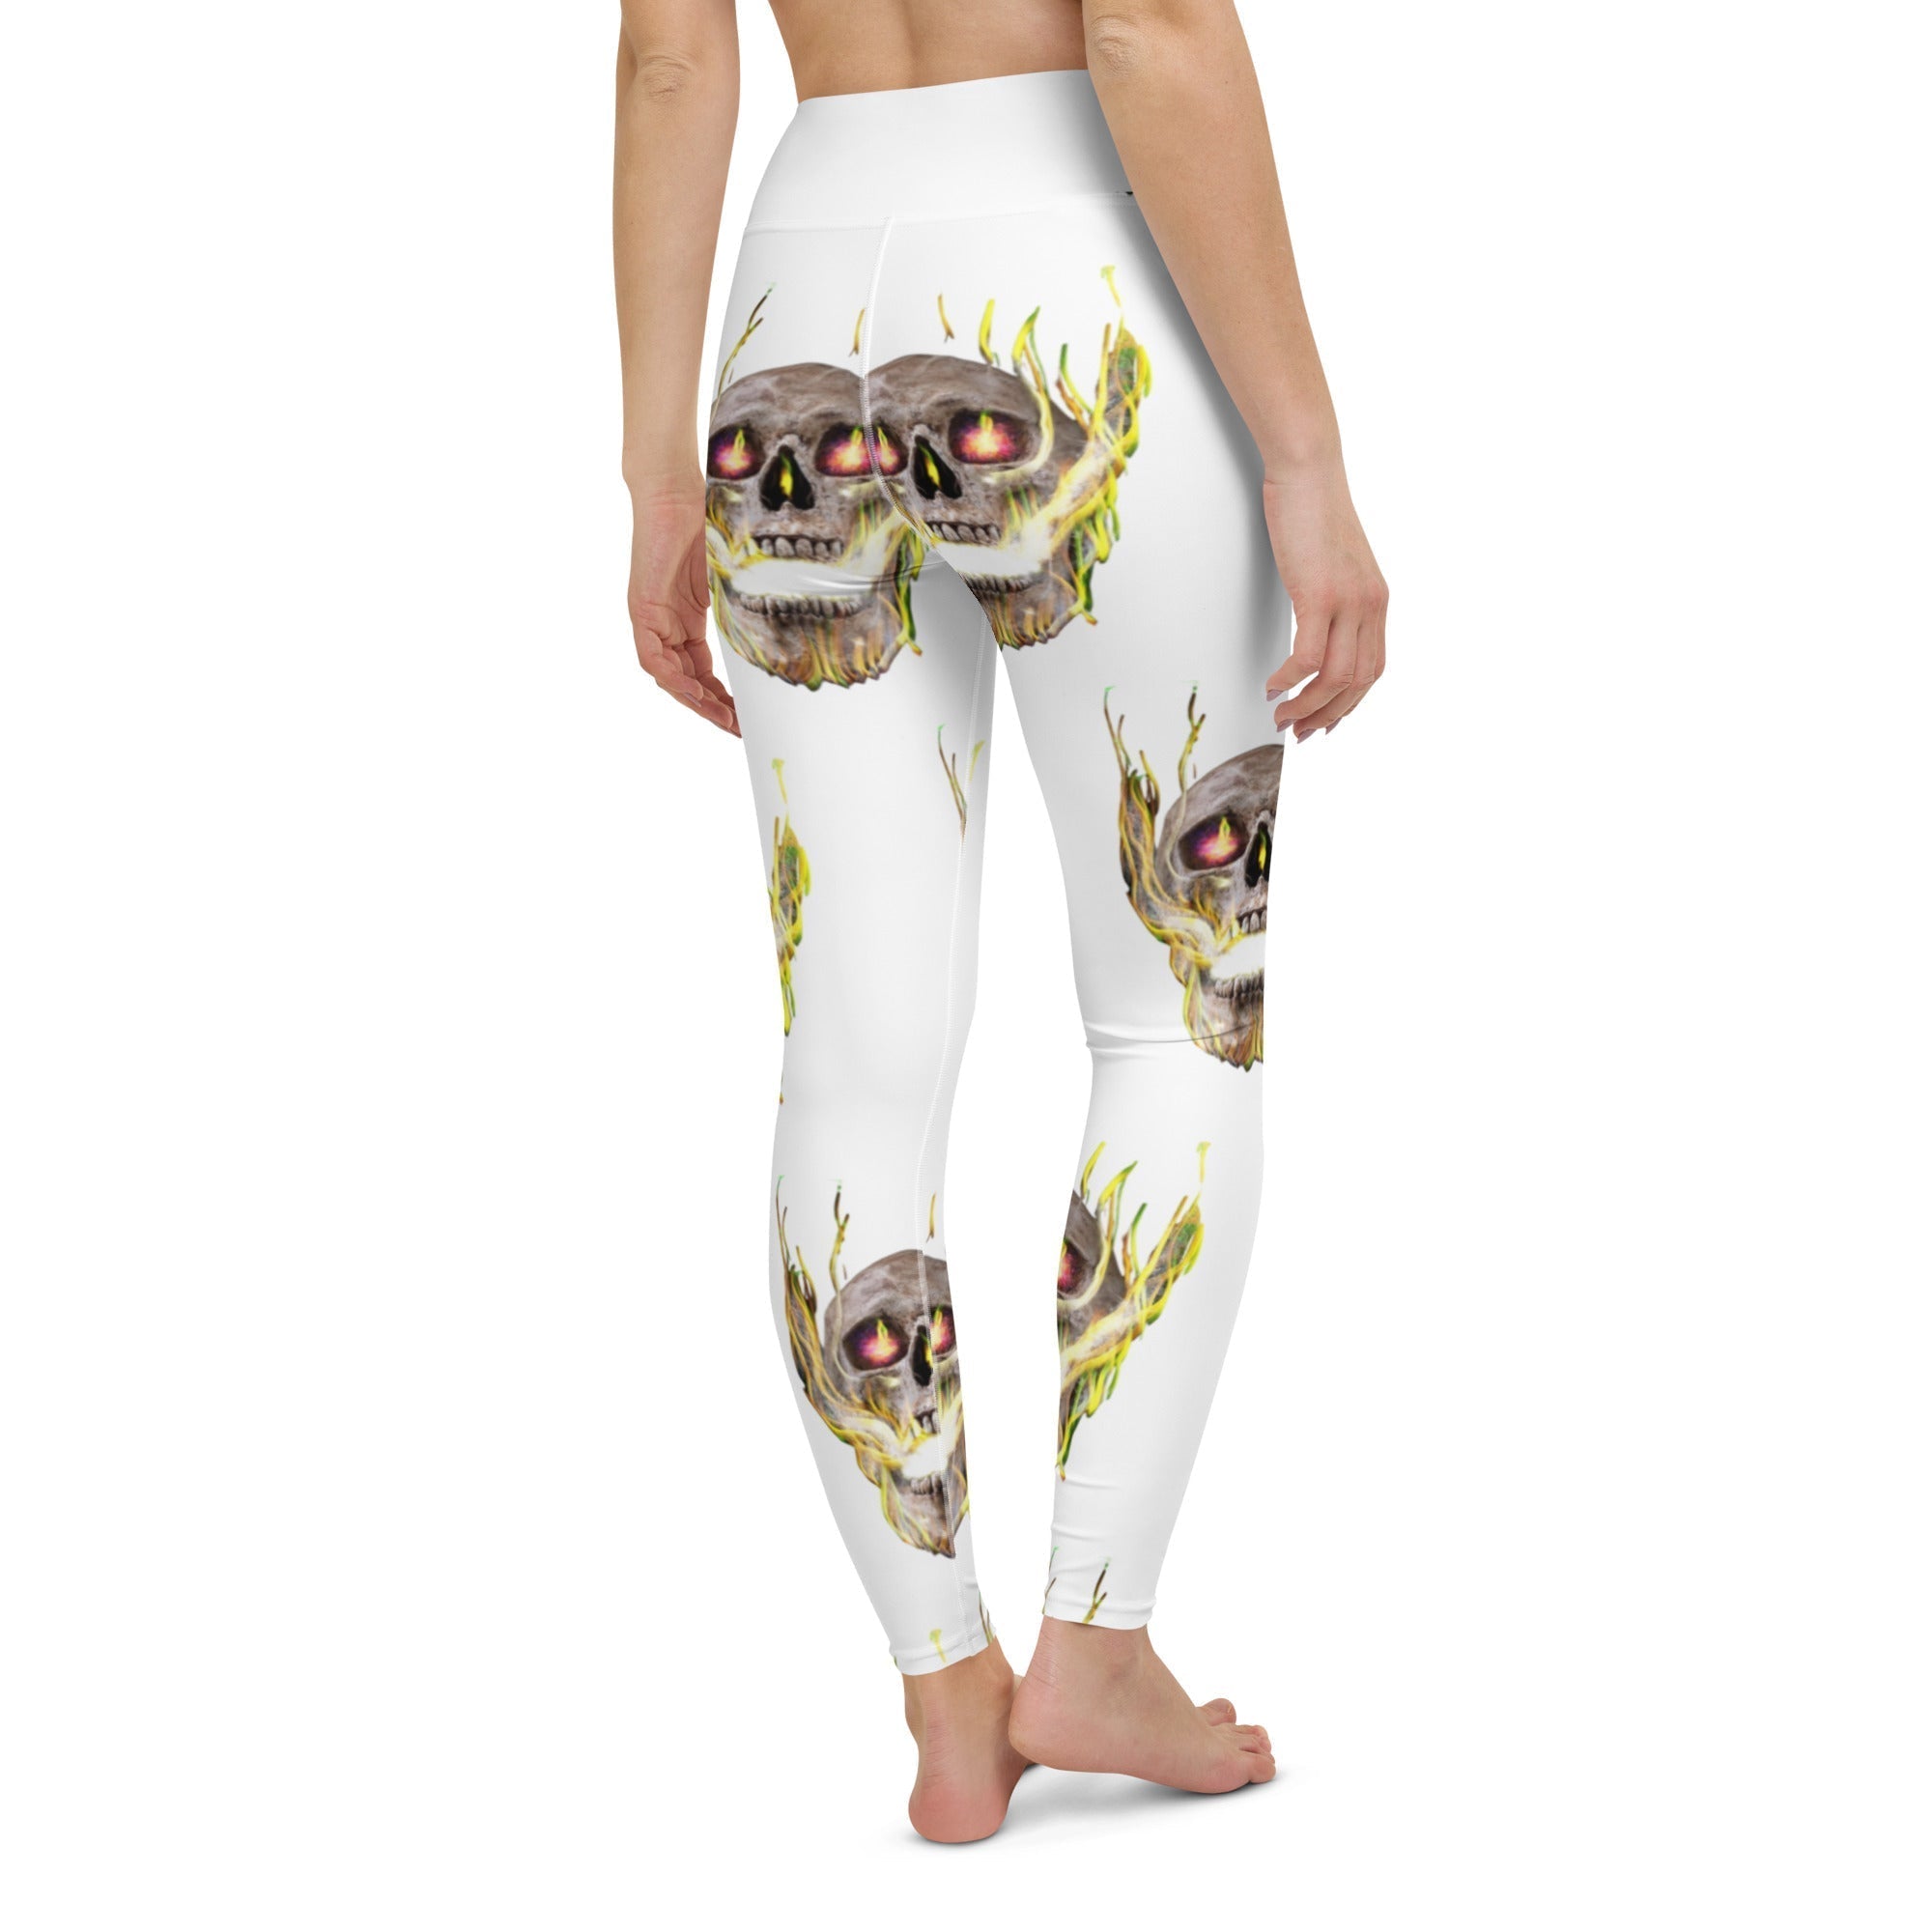 Enchanting Yoga Leggings - Embrace Your Inner Fairy and Flow Through Your Practice with Grace - Guy Christopher